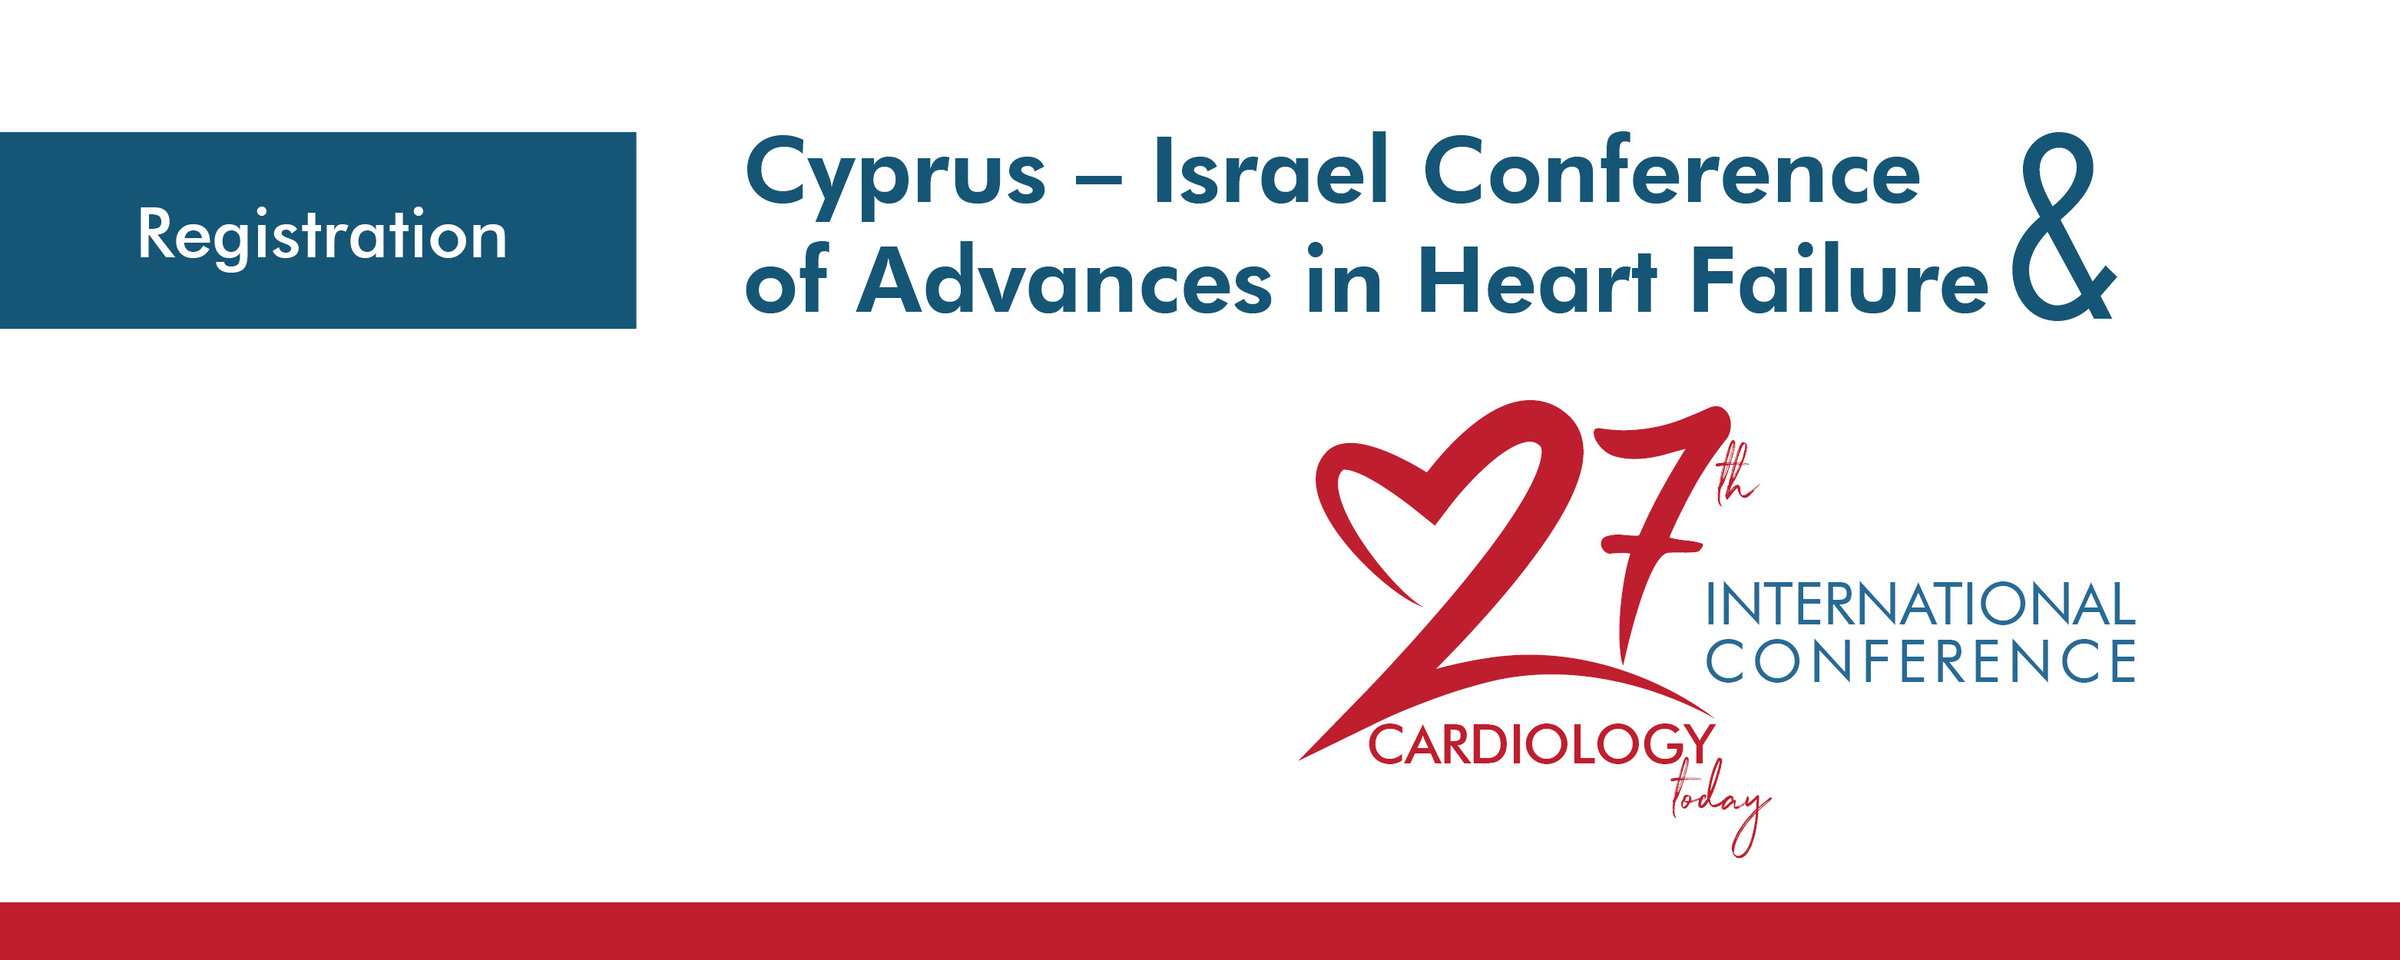 Cyprus-Israel Conference of Advances in Heart Failure & 27th International Conference 'Cardiology Today'